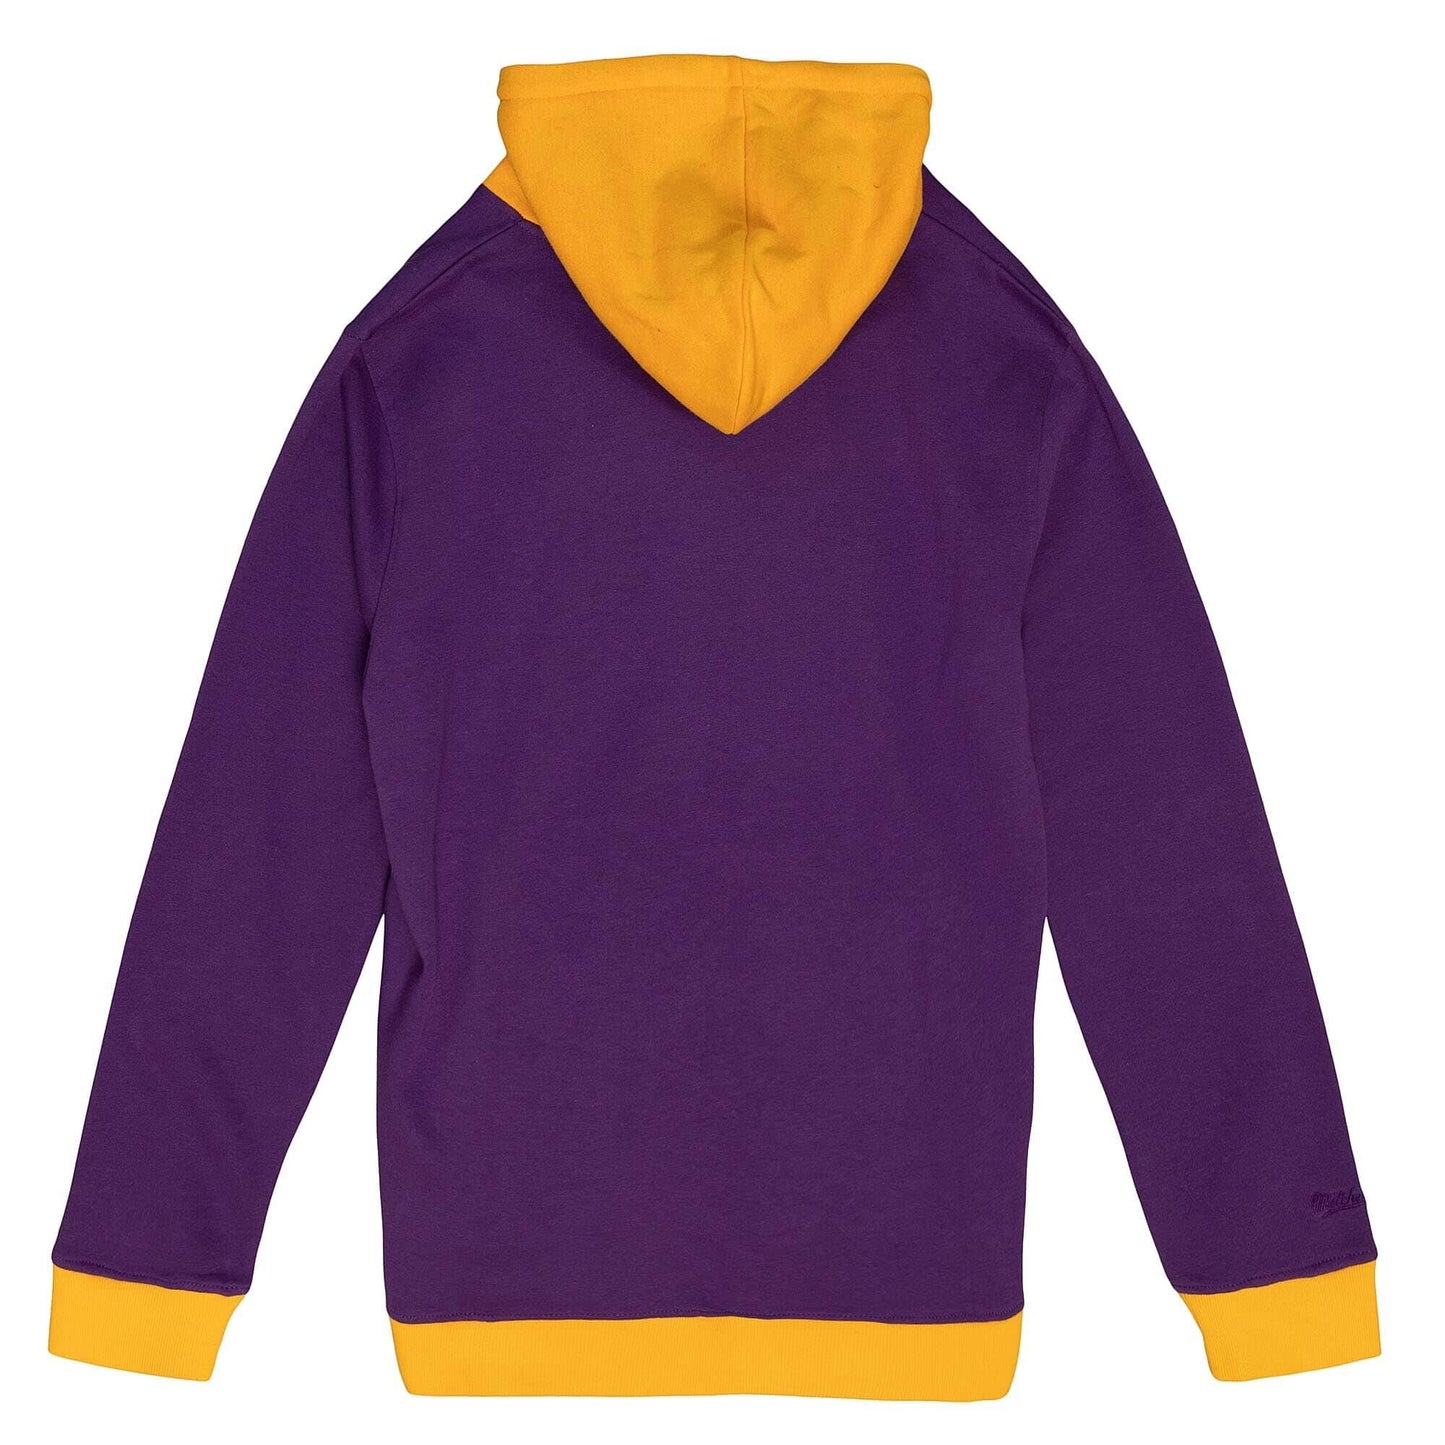 Mitchell & Ness NBA BIG FACE HOODY 5.0 LOS ANGELES LAKERS Purple